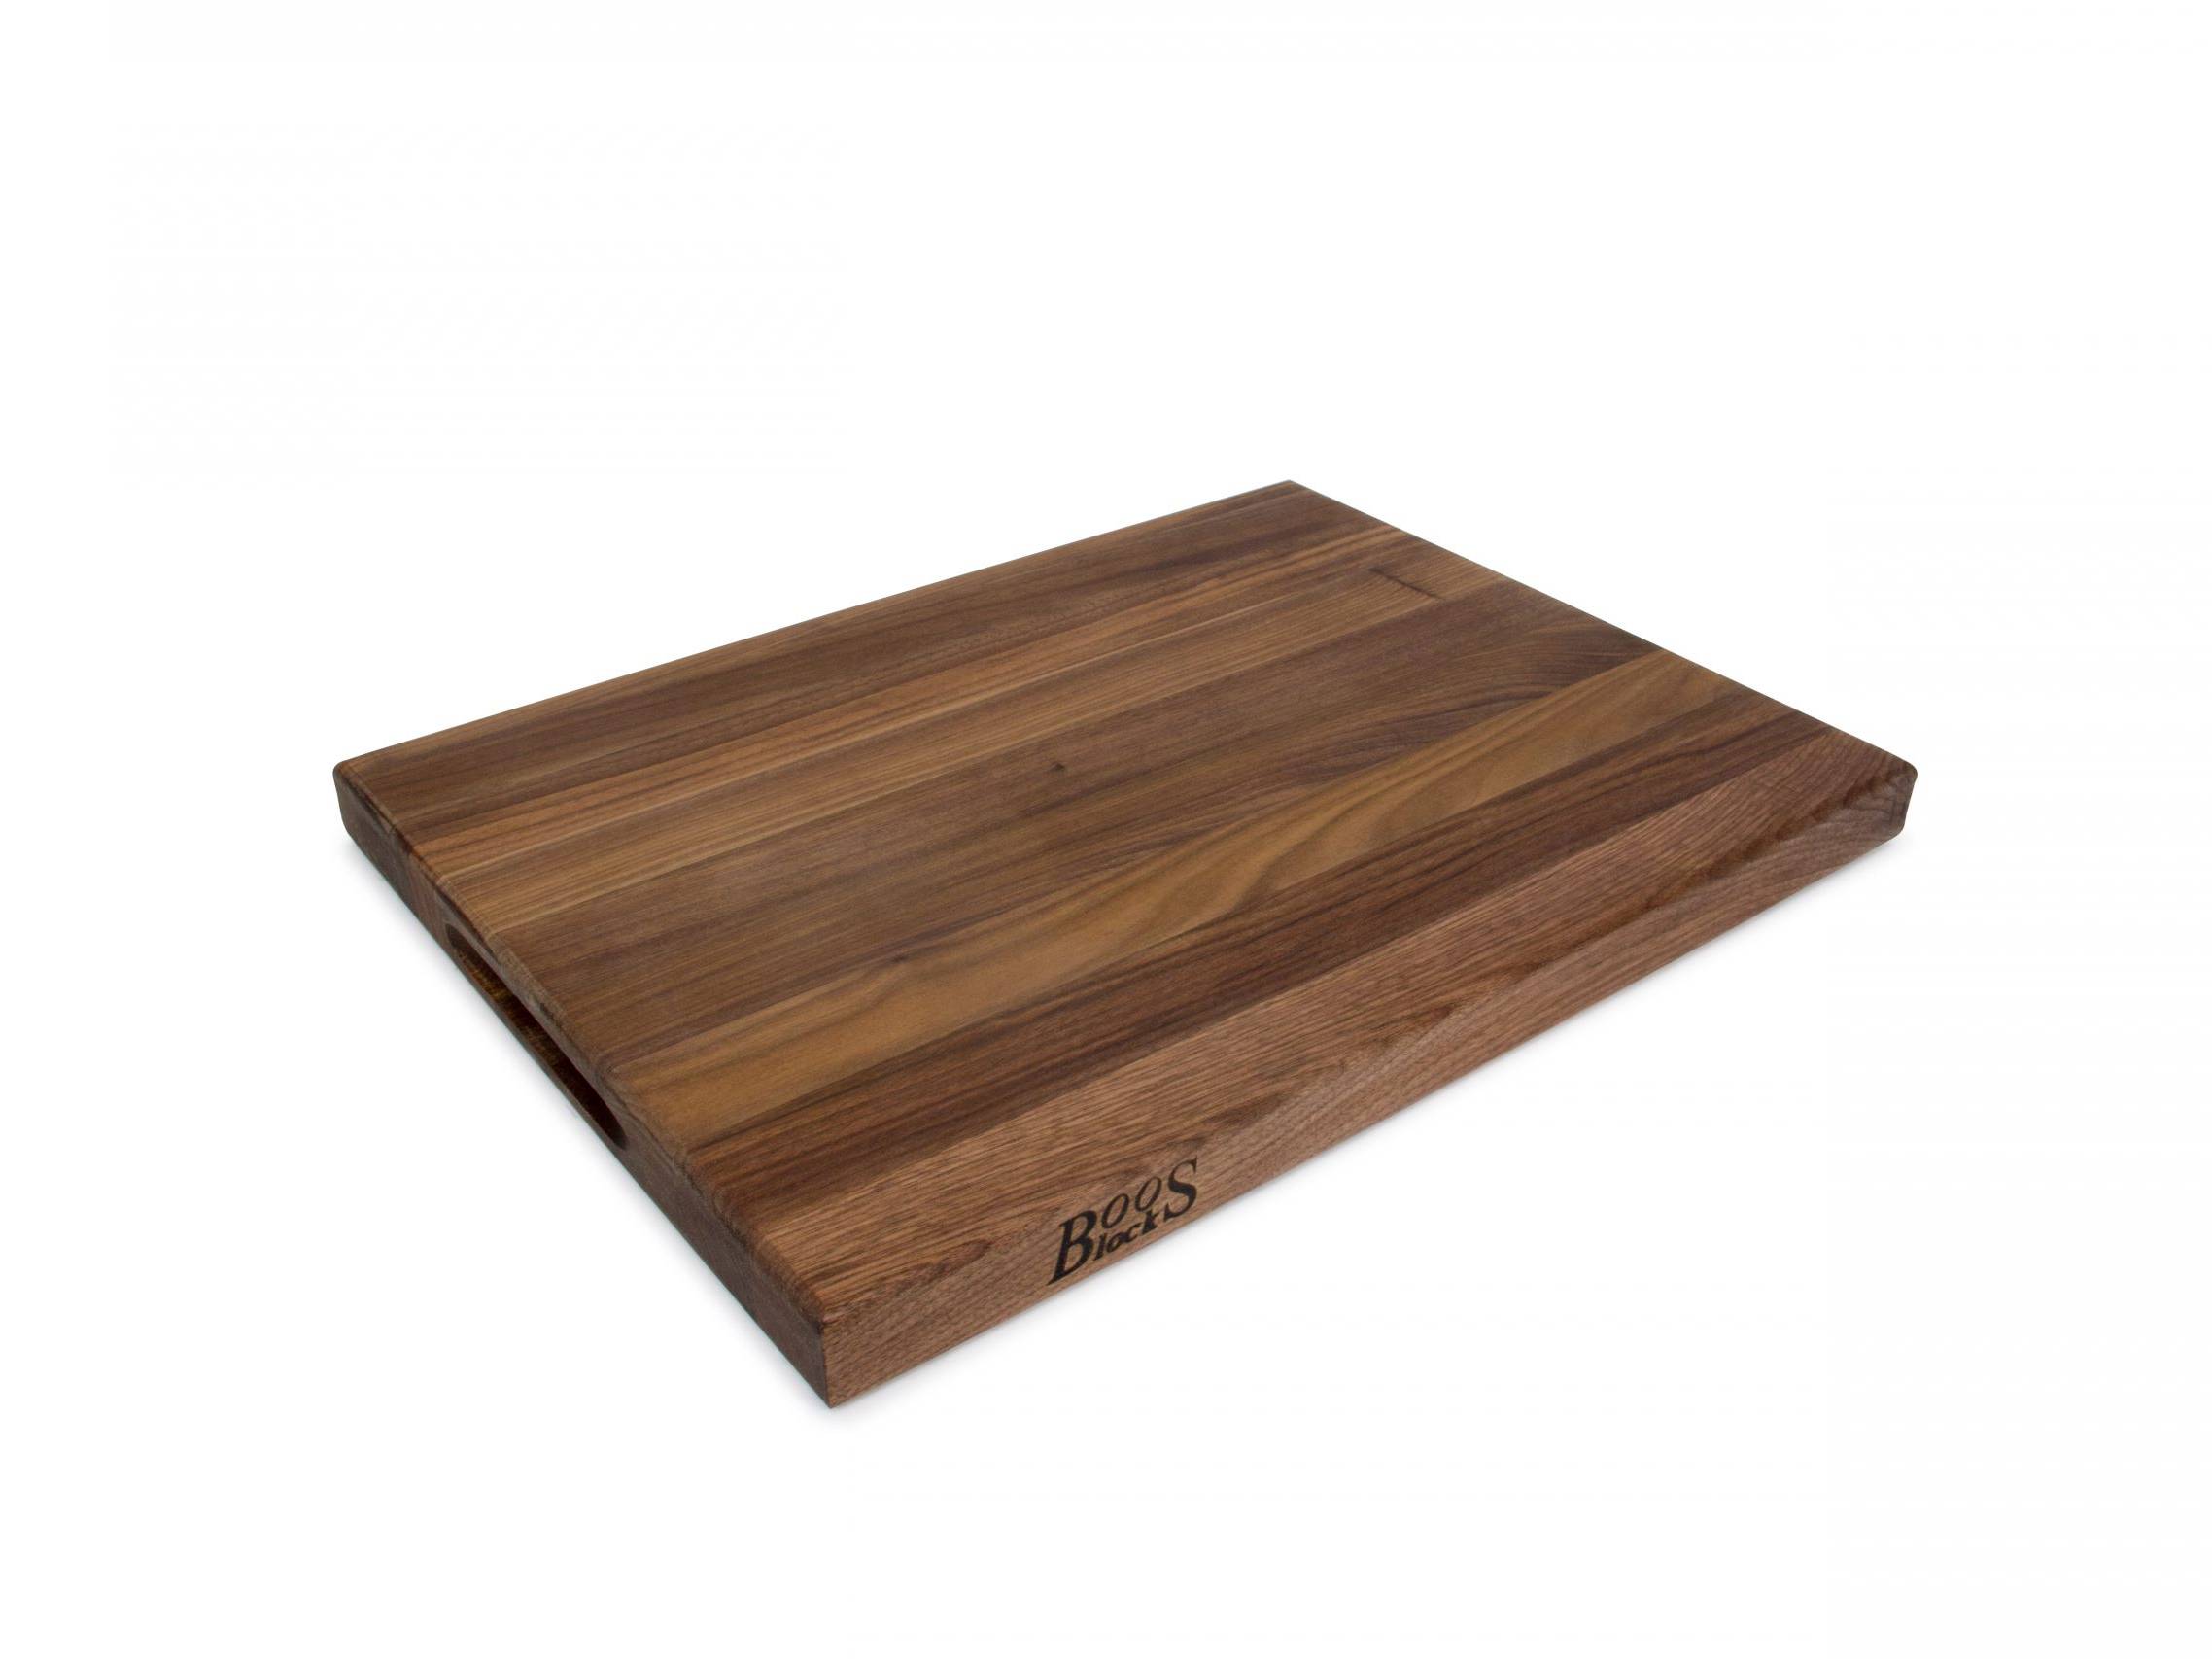 Pro Chef Black Walnut cutting board with recessed handles; can be used on both sides 83